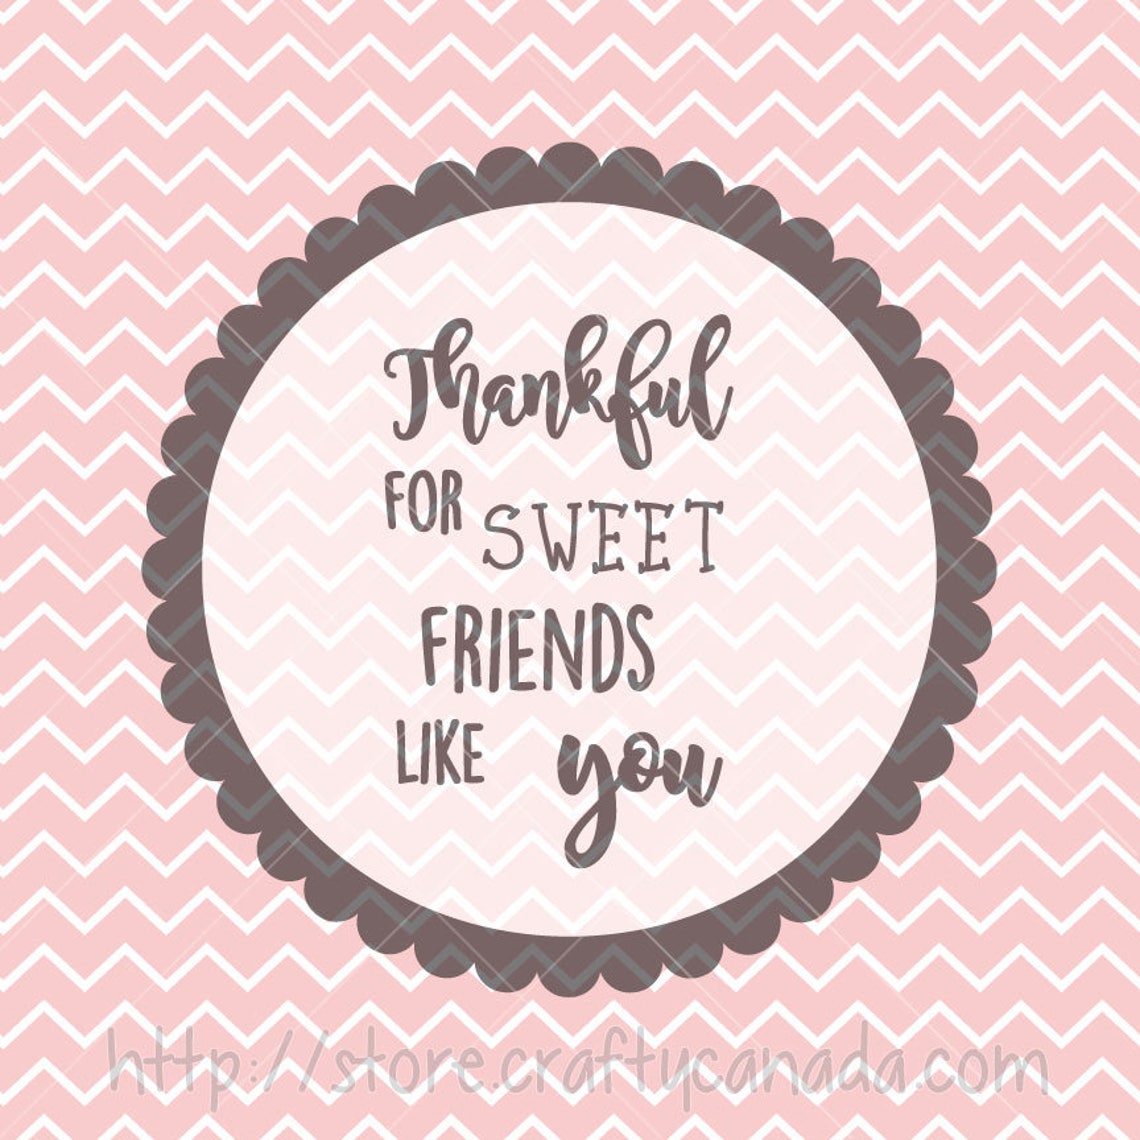 thankful-for-sweet-friends-like-you-friendsgiving-quotes-thankful